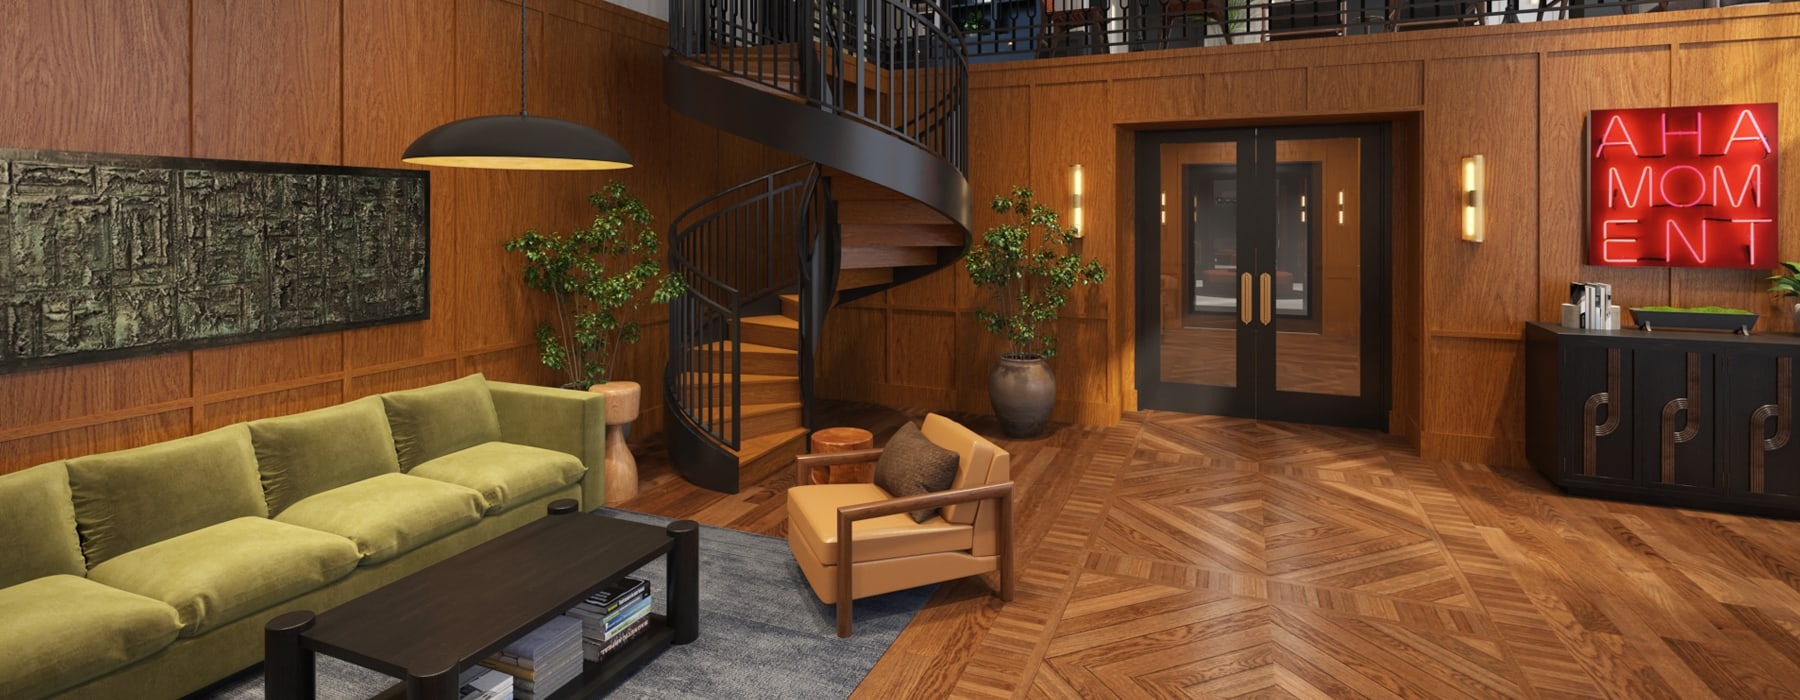 rendering of lobby area showing modern decor and a spiral staircase